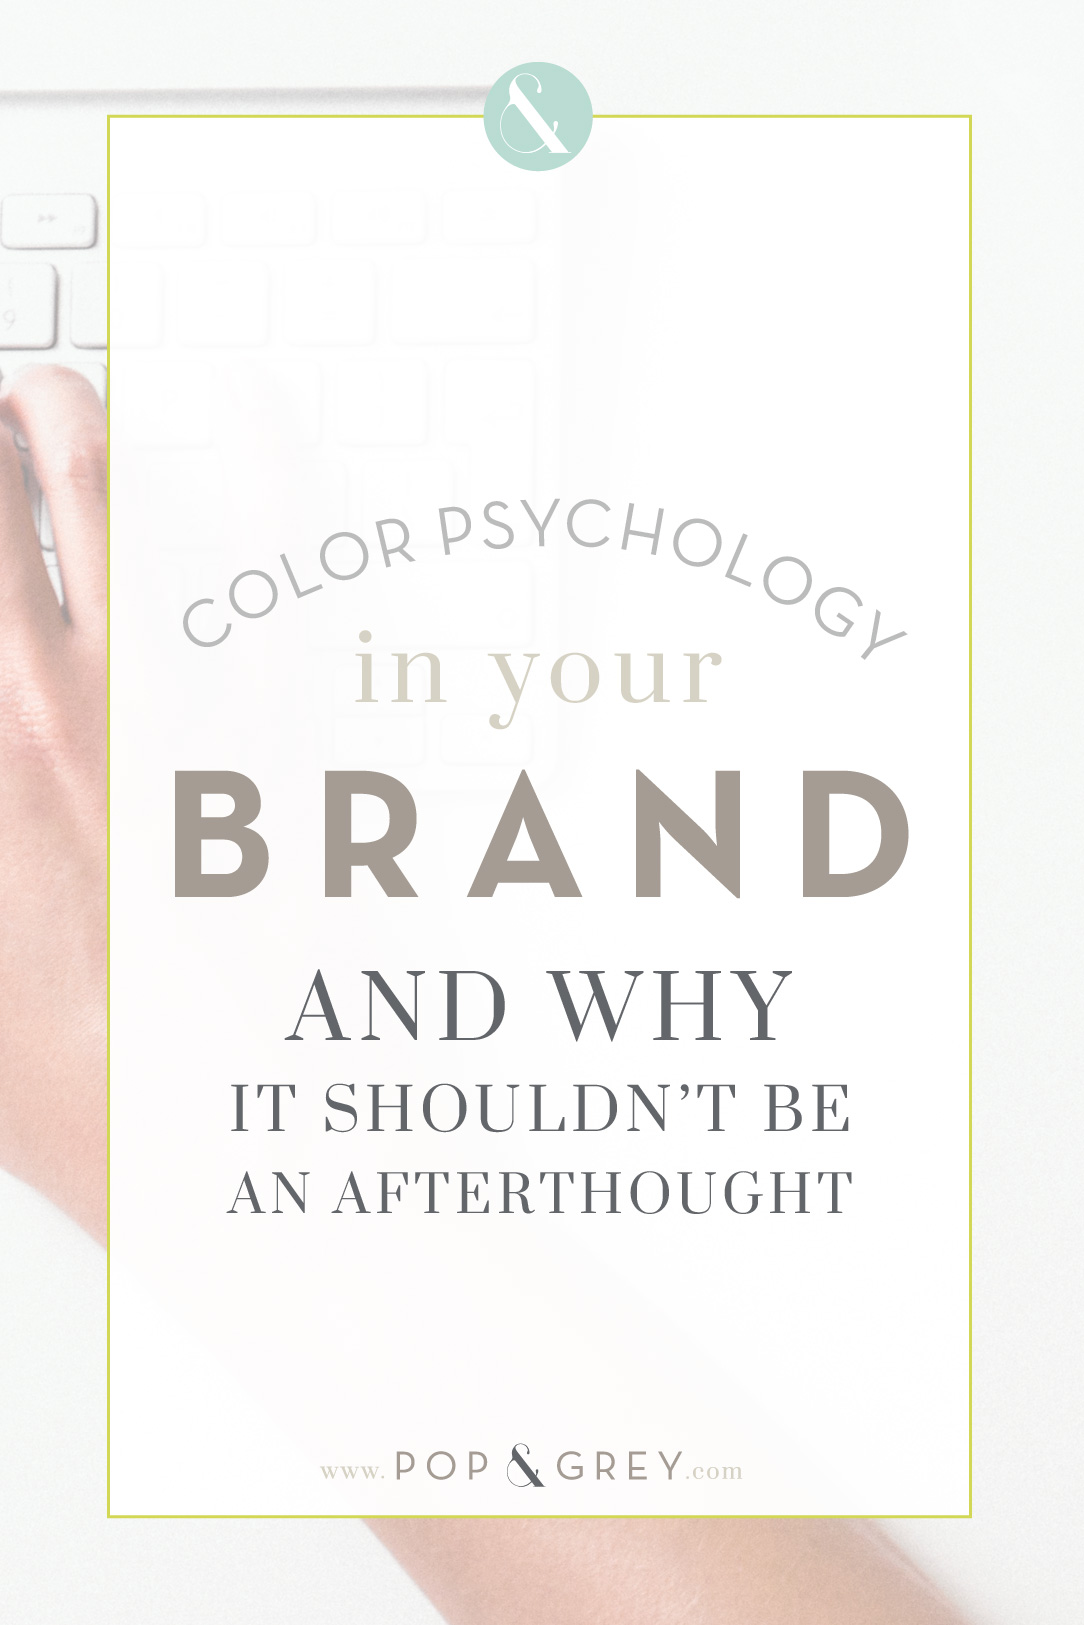 color psychology in your brand and why it shouldn't be an afterthought by Pop & Grey